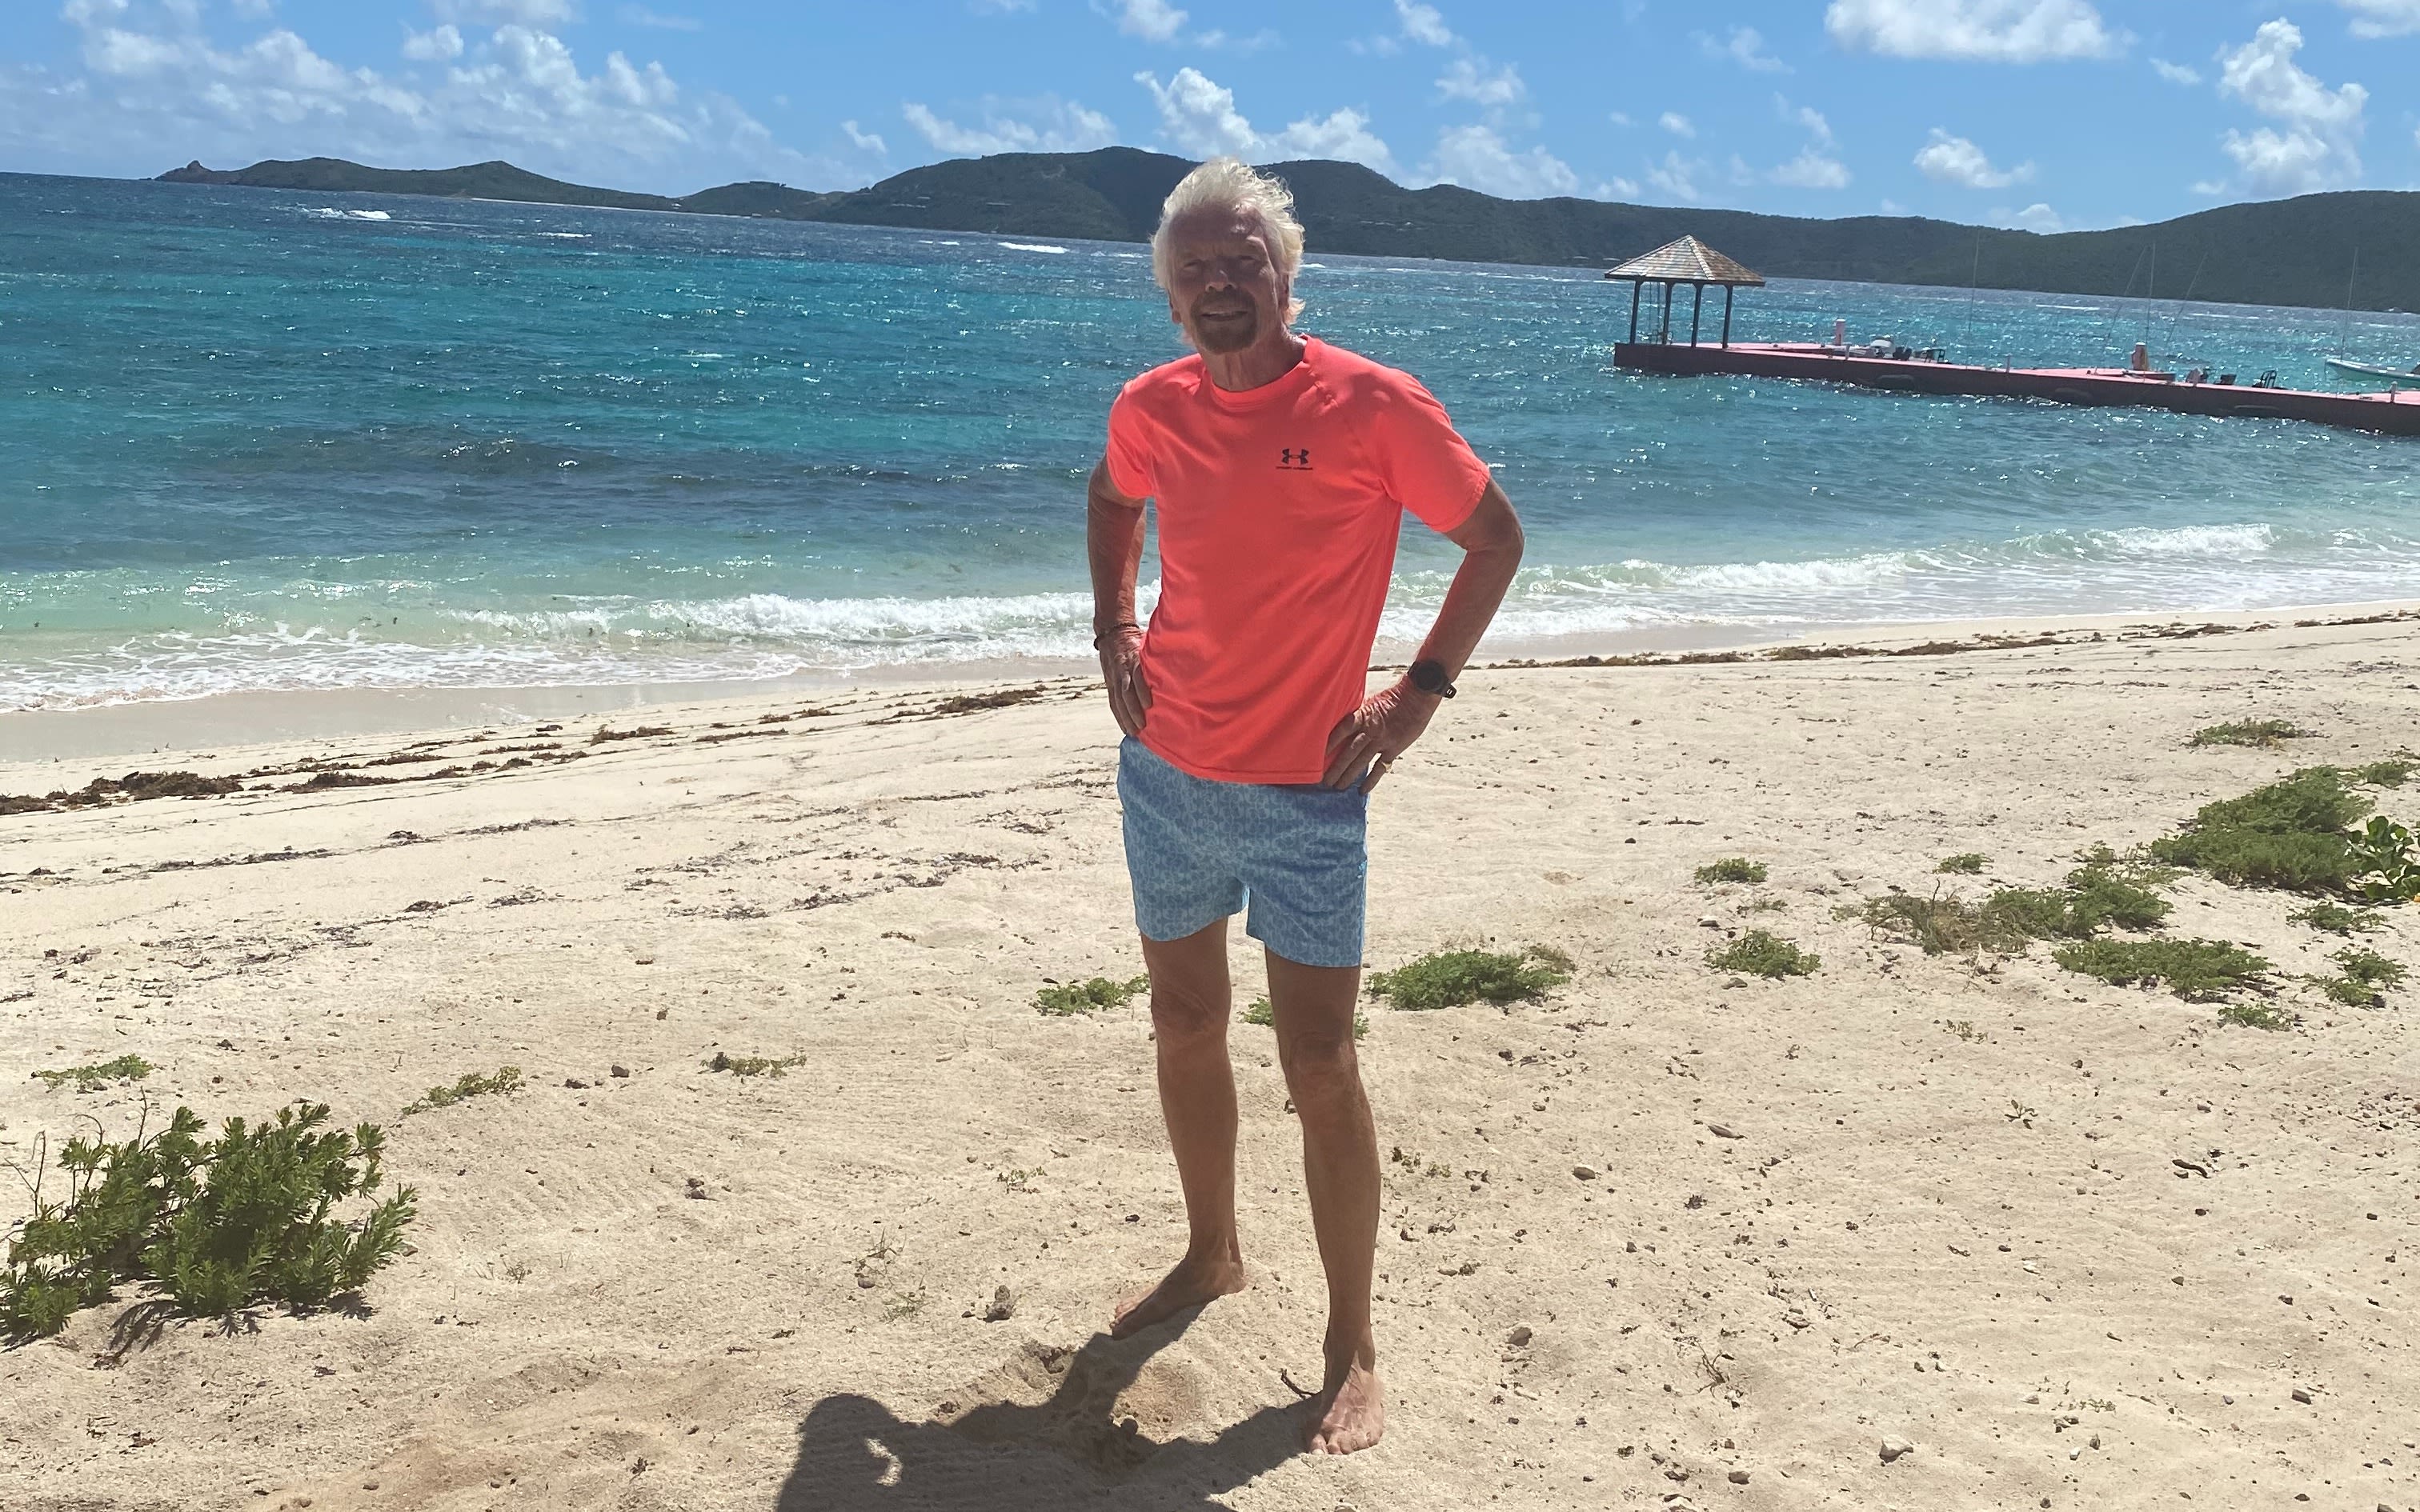 Richard Branson standing on the beach about to go for a swim 